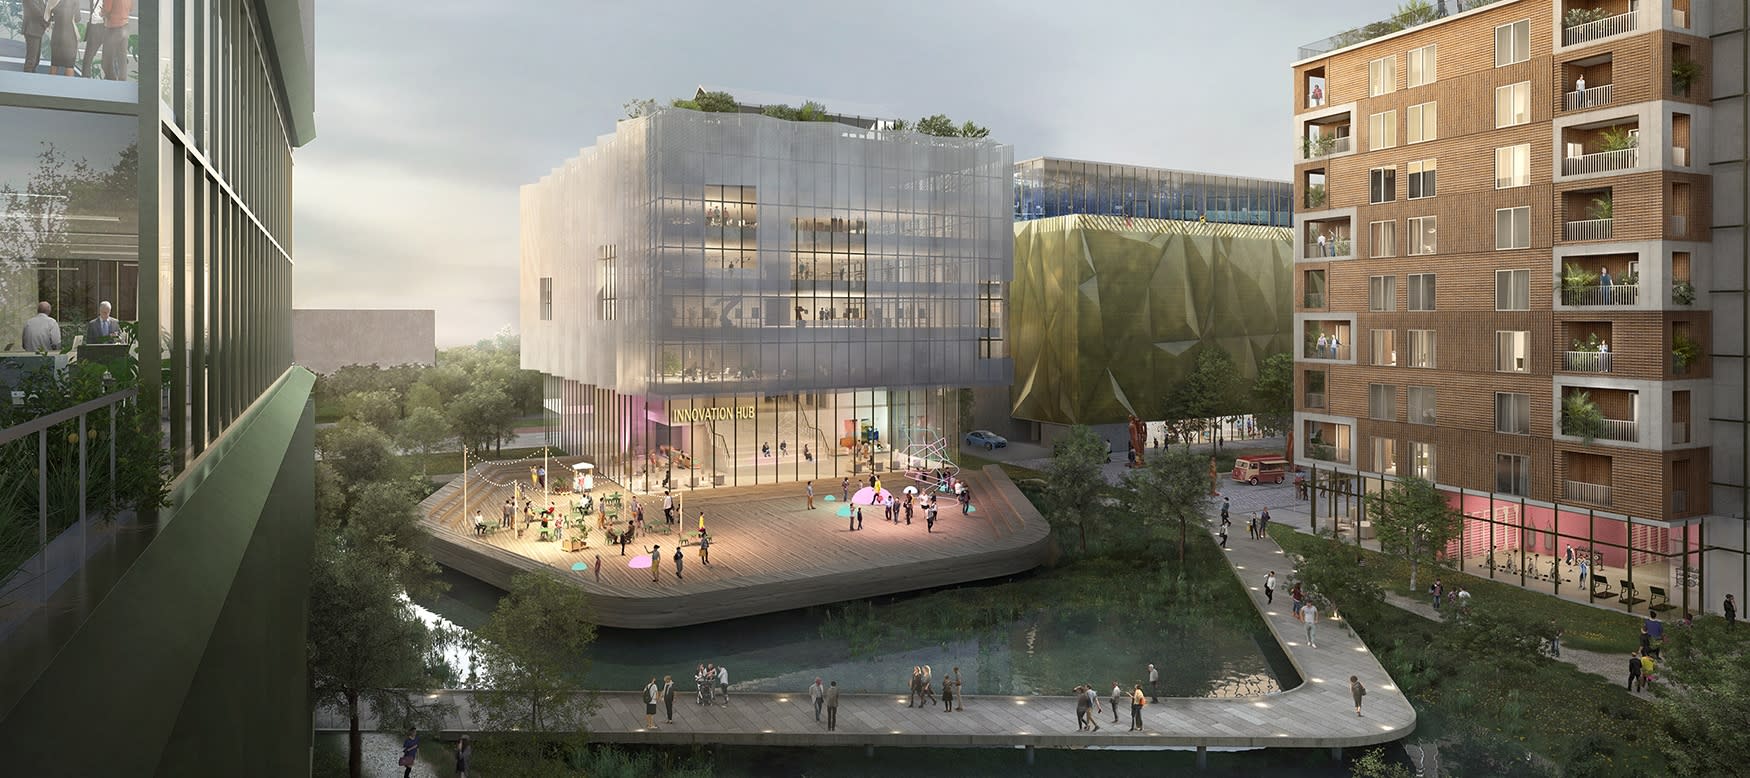 An artistic impression of what Cambridge Business Park could look like.